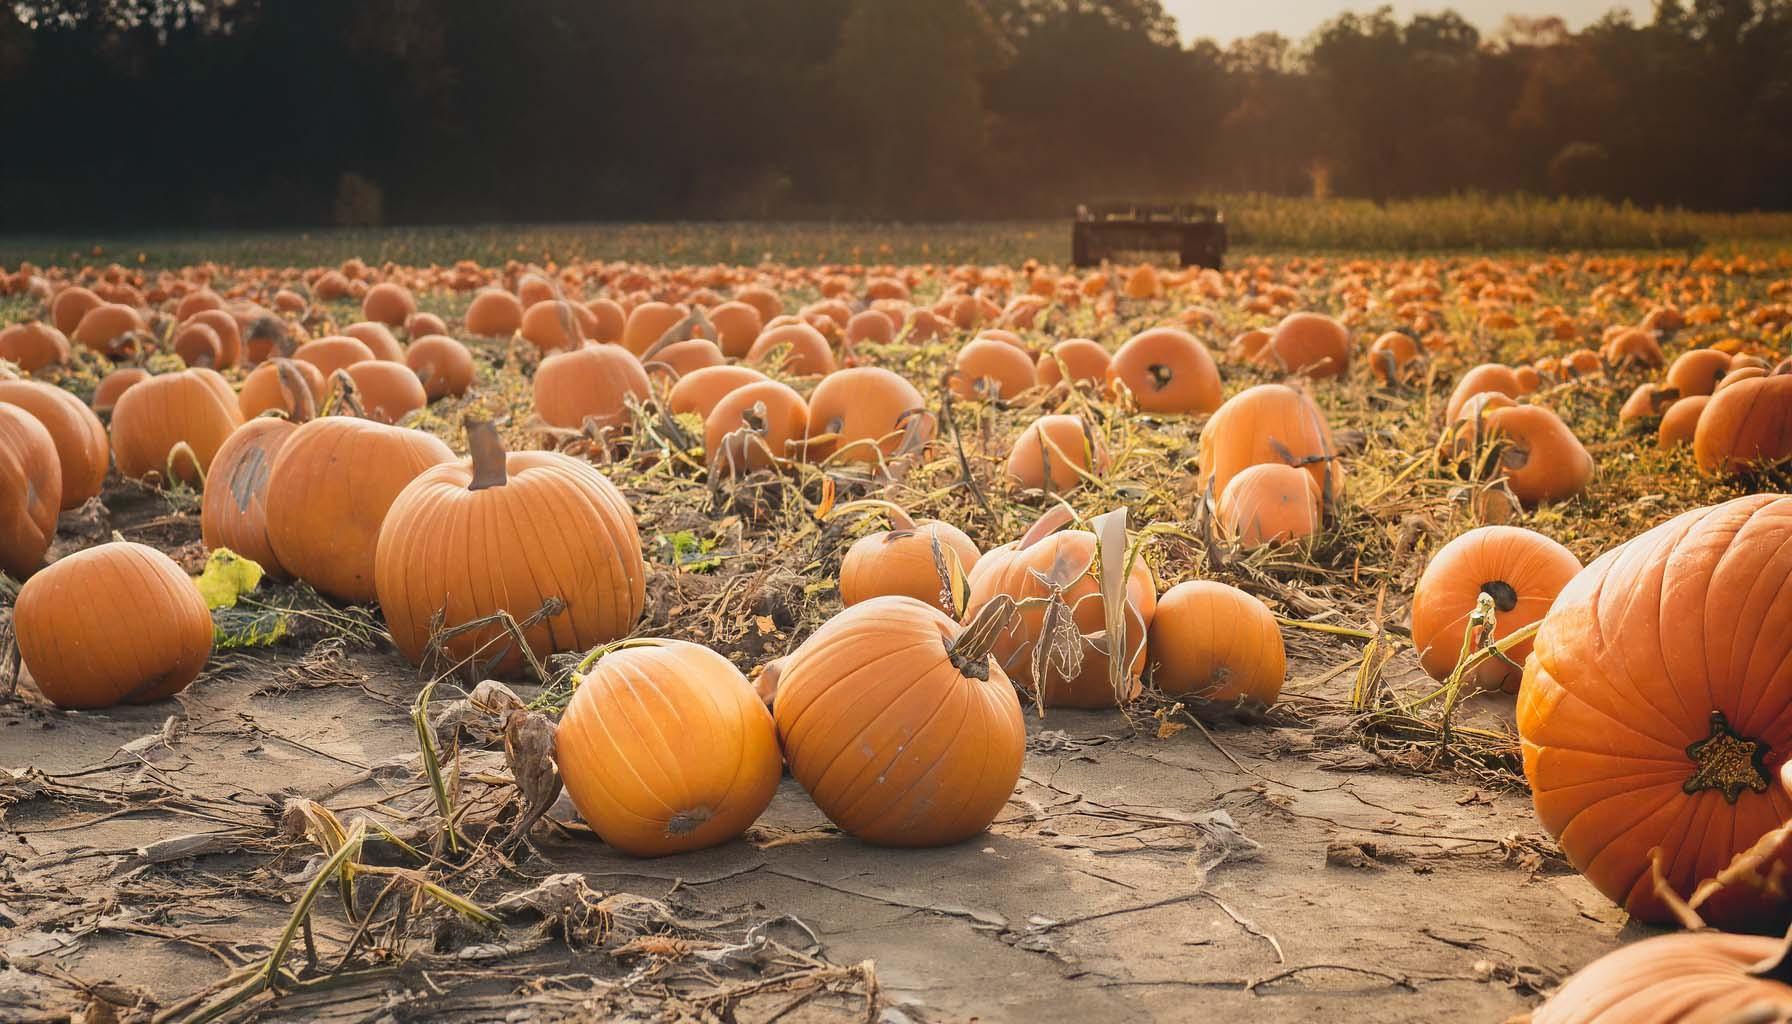 A pumpkin patch during the fall